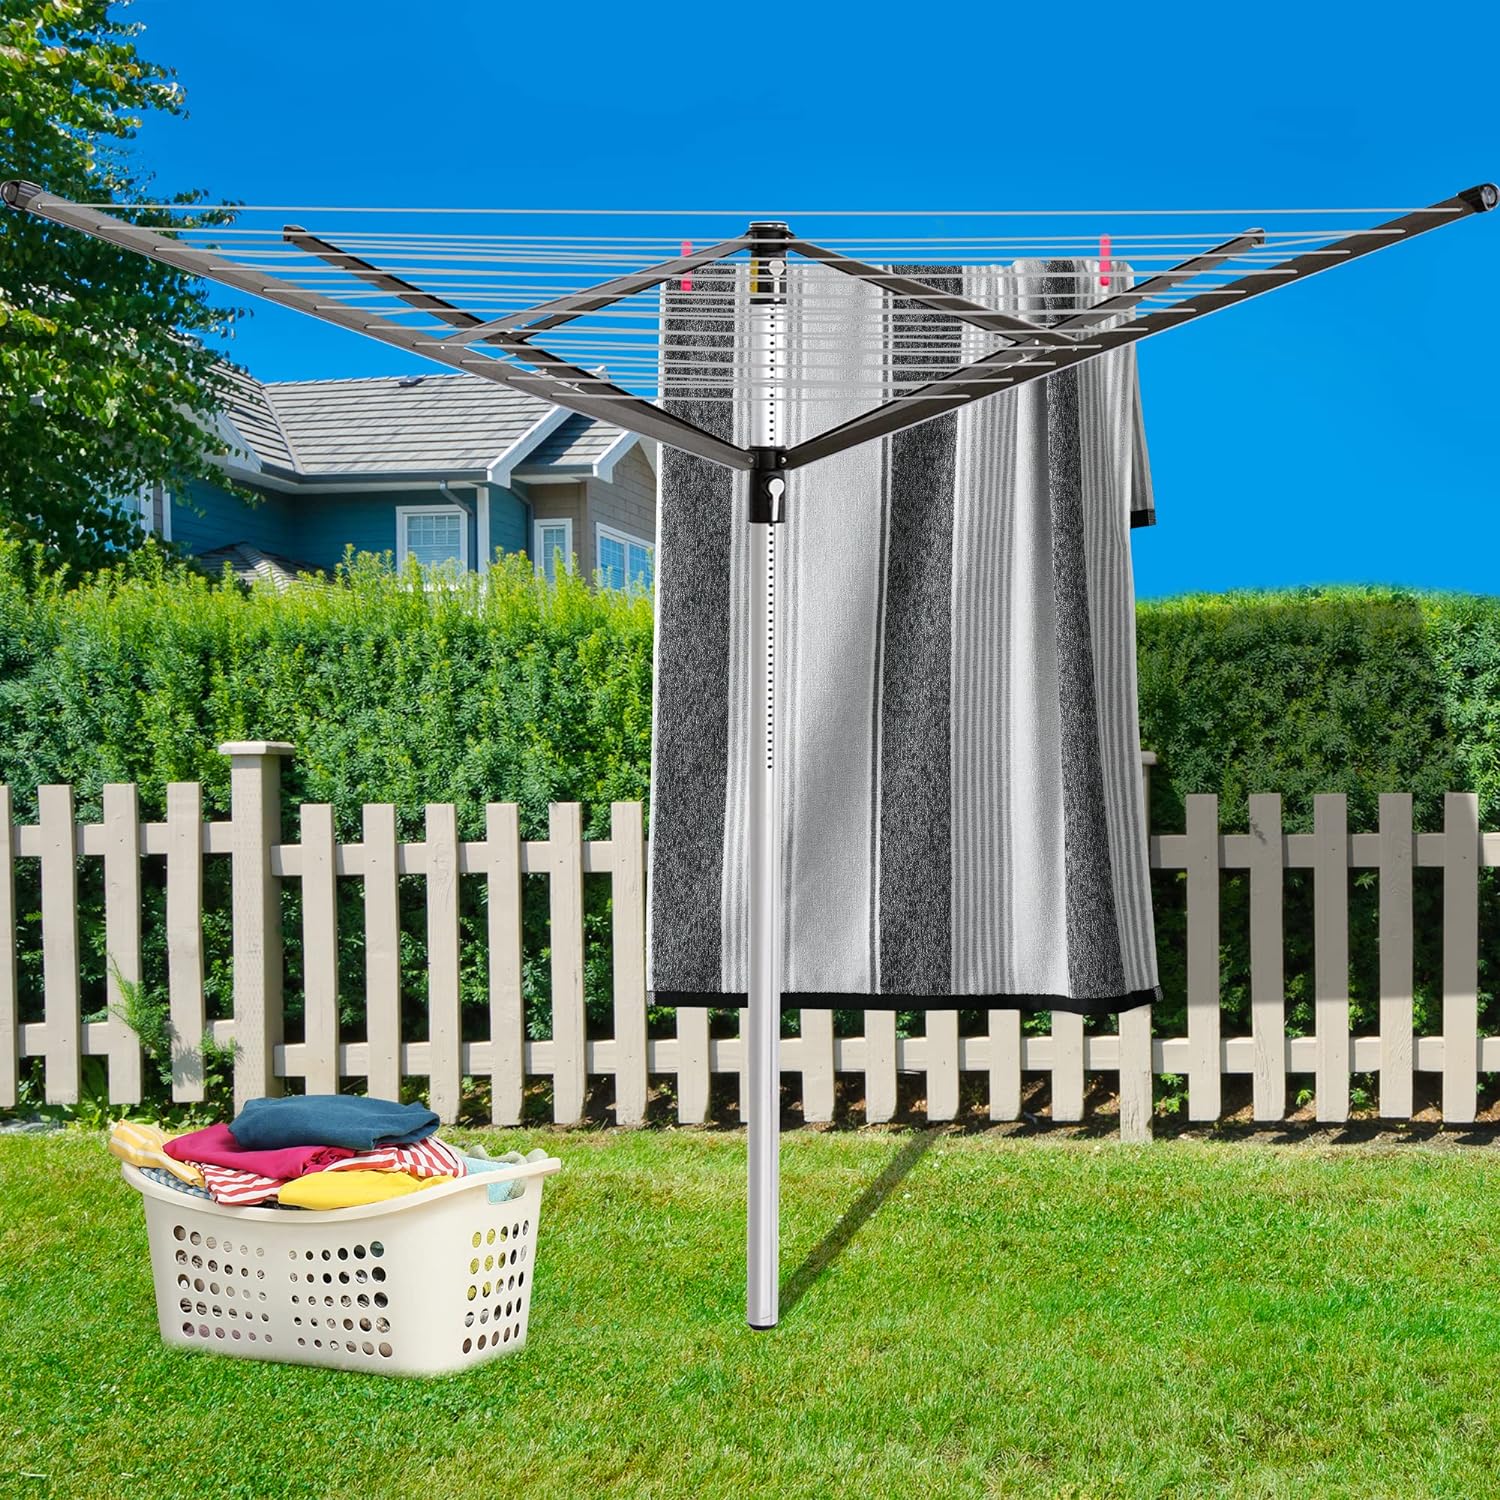 Bizvalue Clothesline Outdoor Rotary Dryer, 4 Arms Foldable Heavy